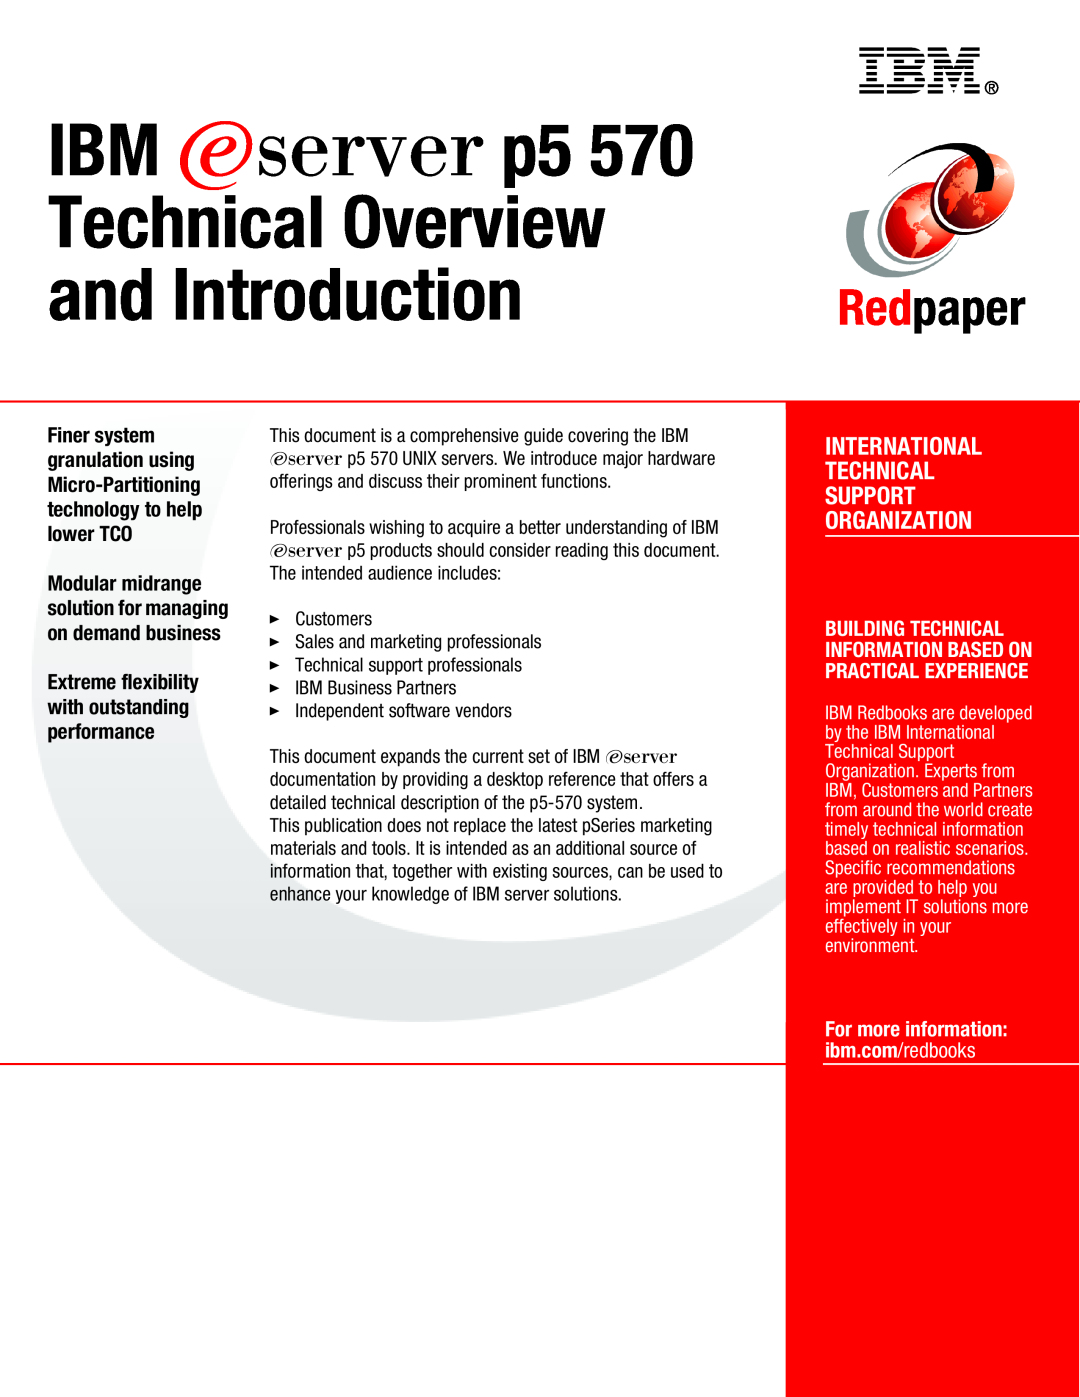 IBM P5 570 manual For more information: ibm.com/redbooks, IBM Eserver p5, Technical Overview, and Introduction, Redpaper 